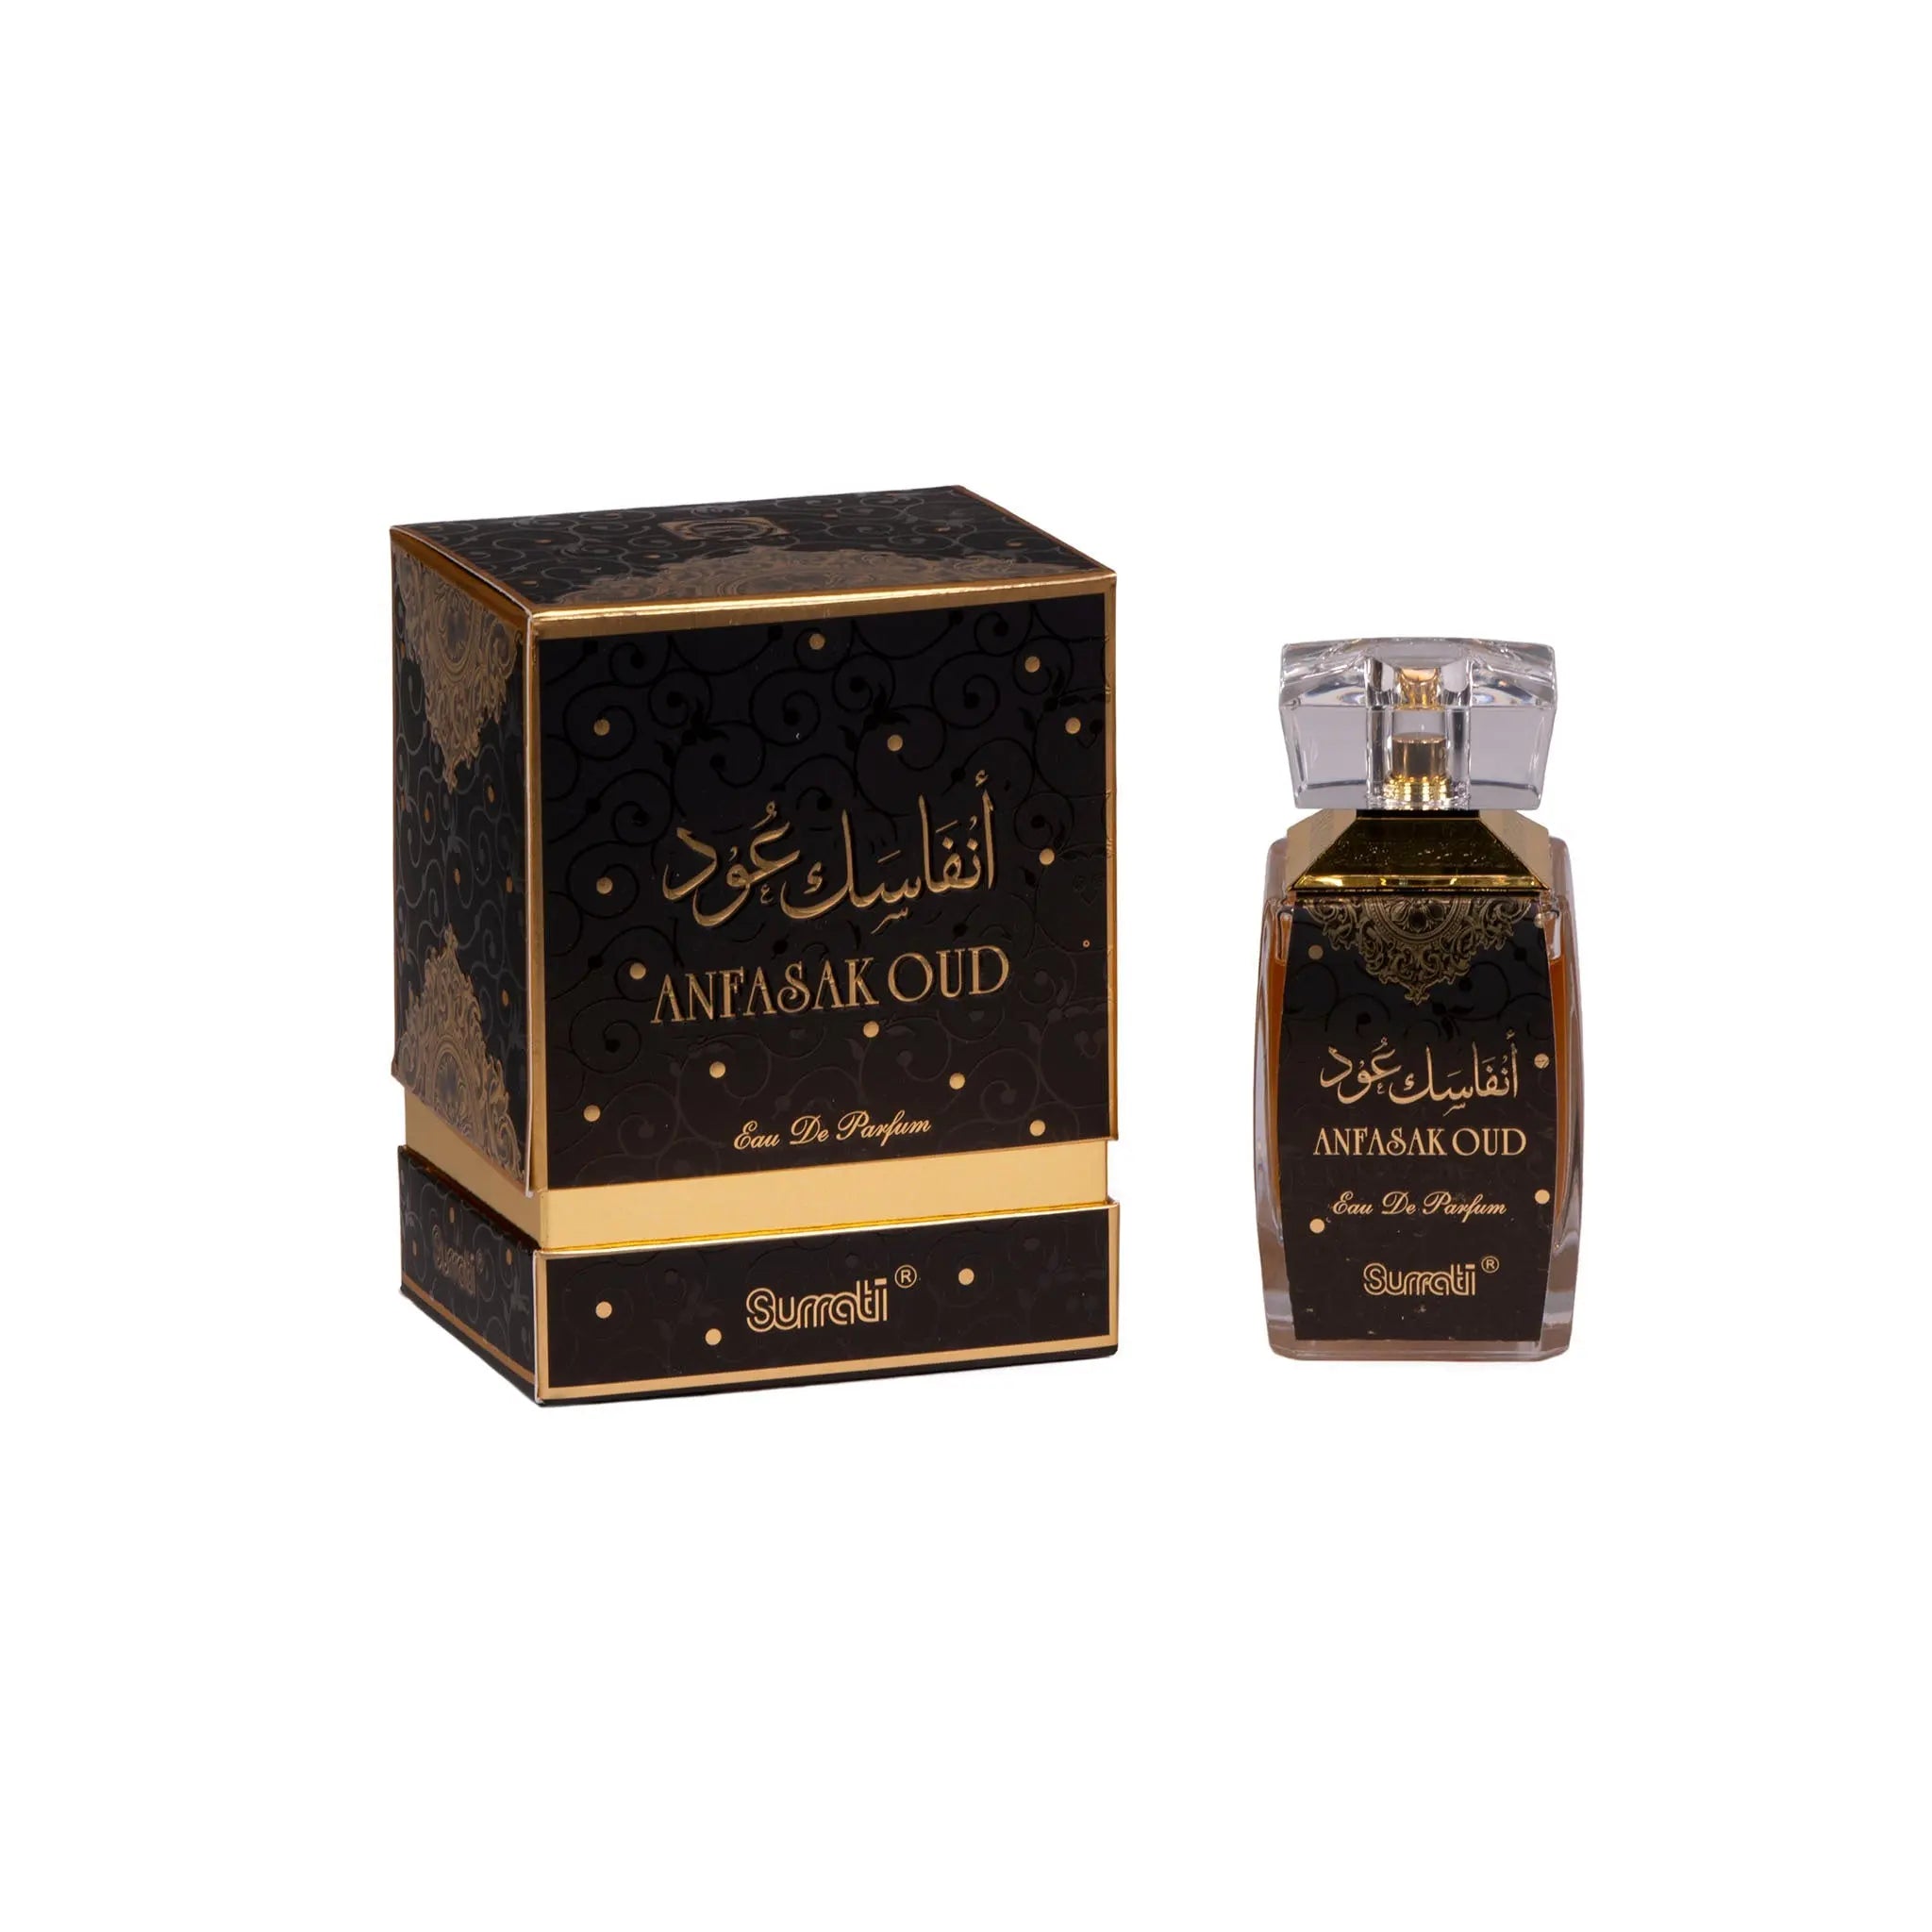 The image features a perfume bottle and its box. The box is black with a luxurious gold pattern, and the text "ANFASAK OUD Eau De Parfum" is written in both Arabic and English in a prominent gold font, indicating "I miss you Oud" or "Your Oud Fragrance." The bottle has a similar design with a clear glass body, dark liquid, and a label that matches the box's design. The cap of the bottle is transparent, and both the bottle and the box bear the brand name "Surrati."